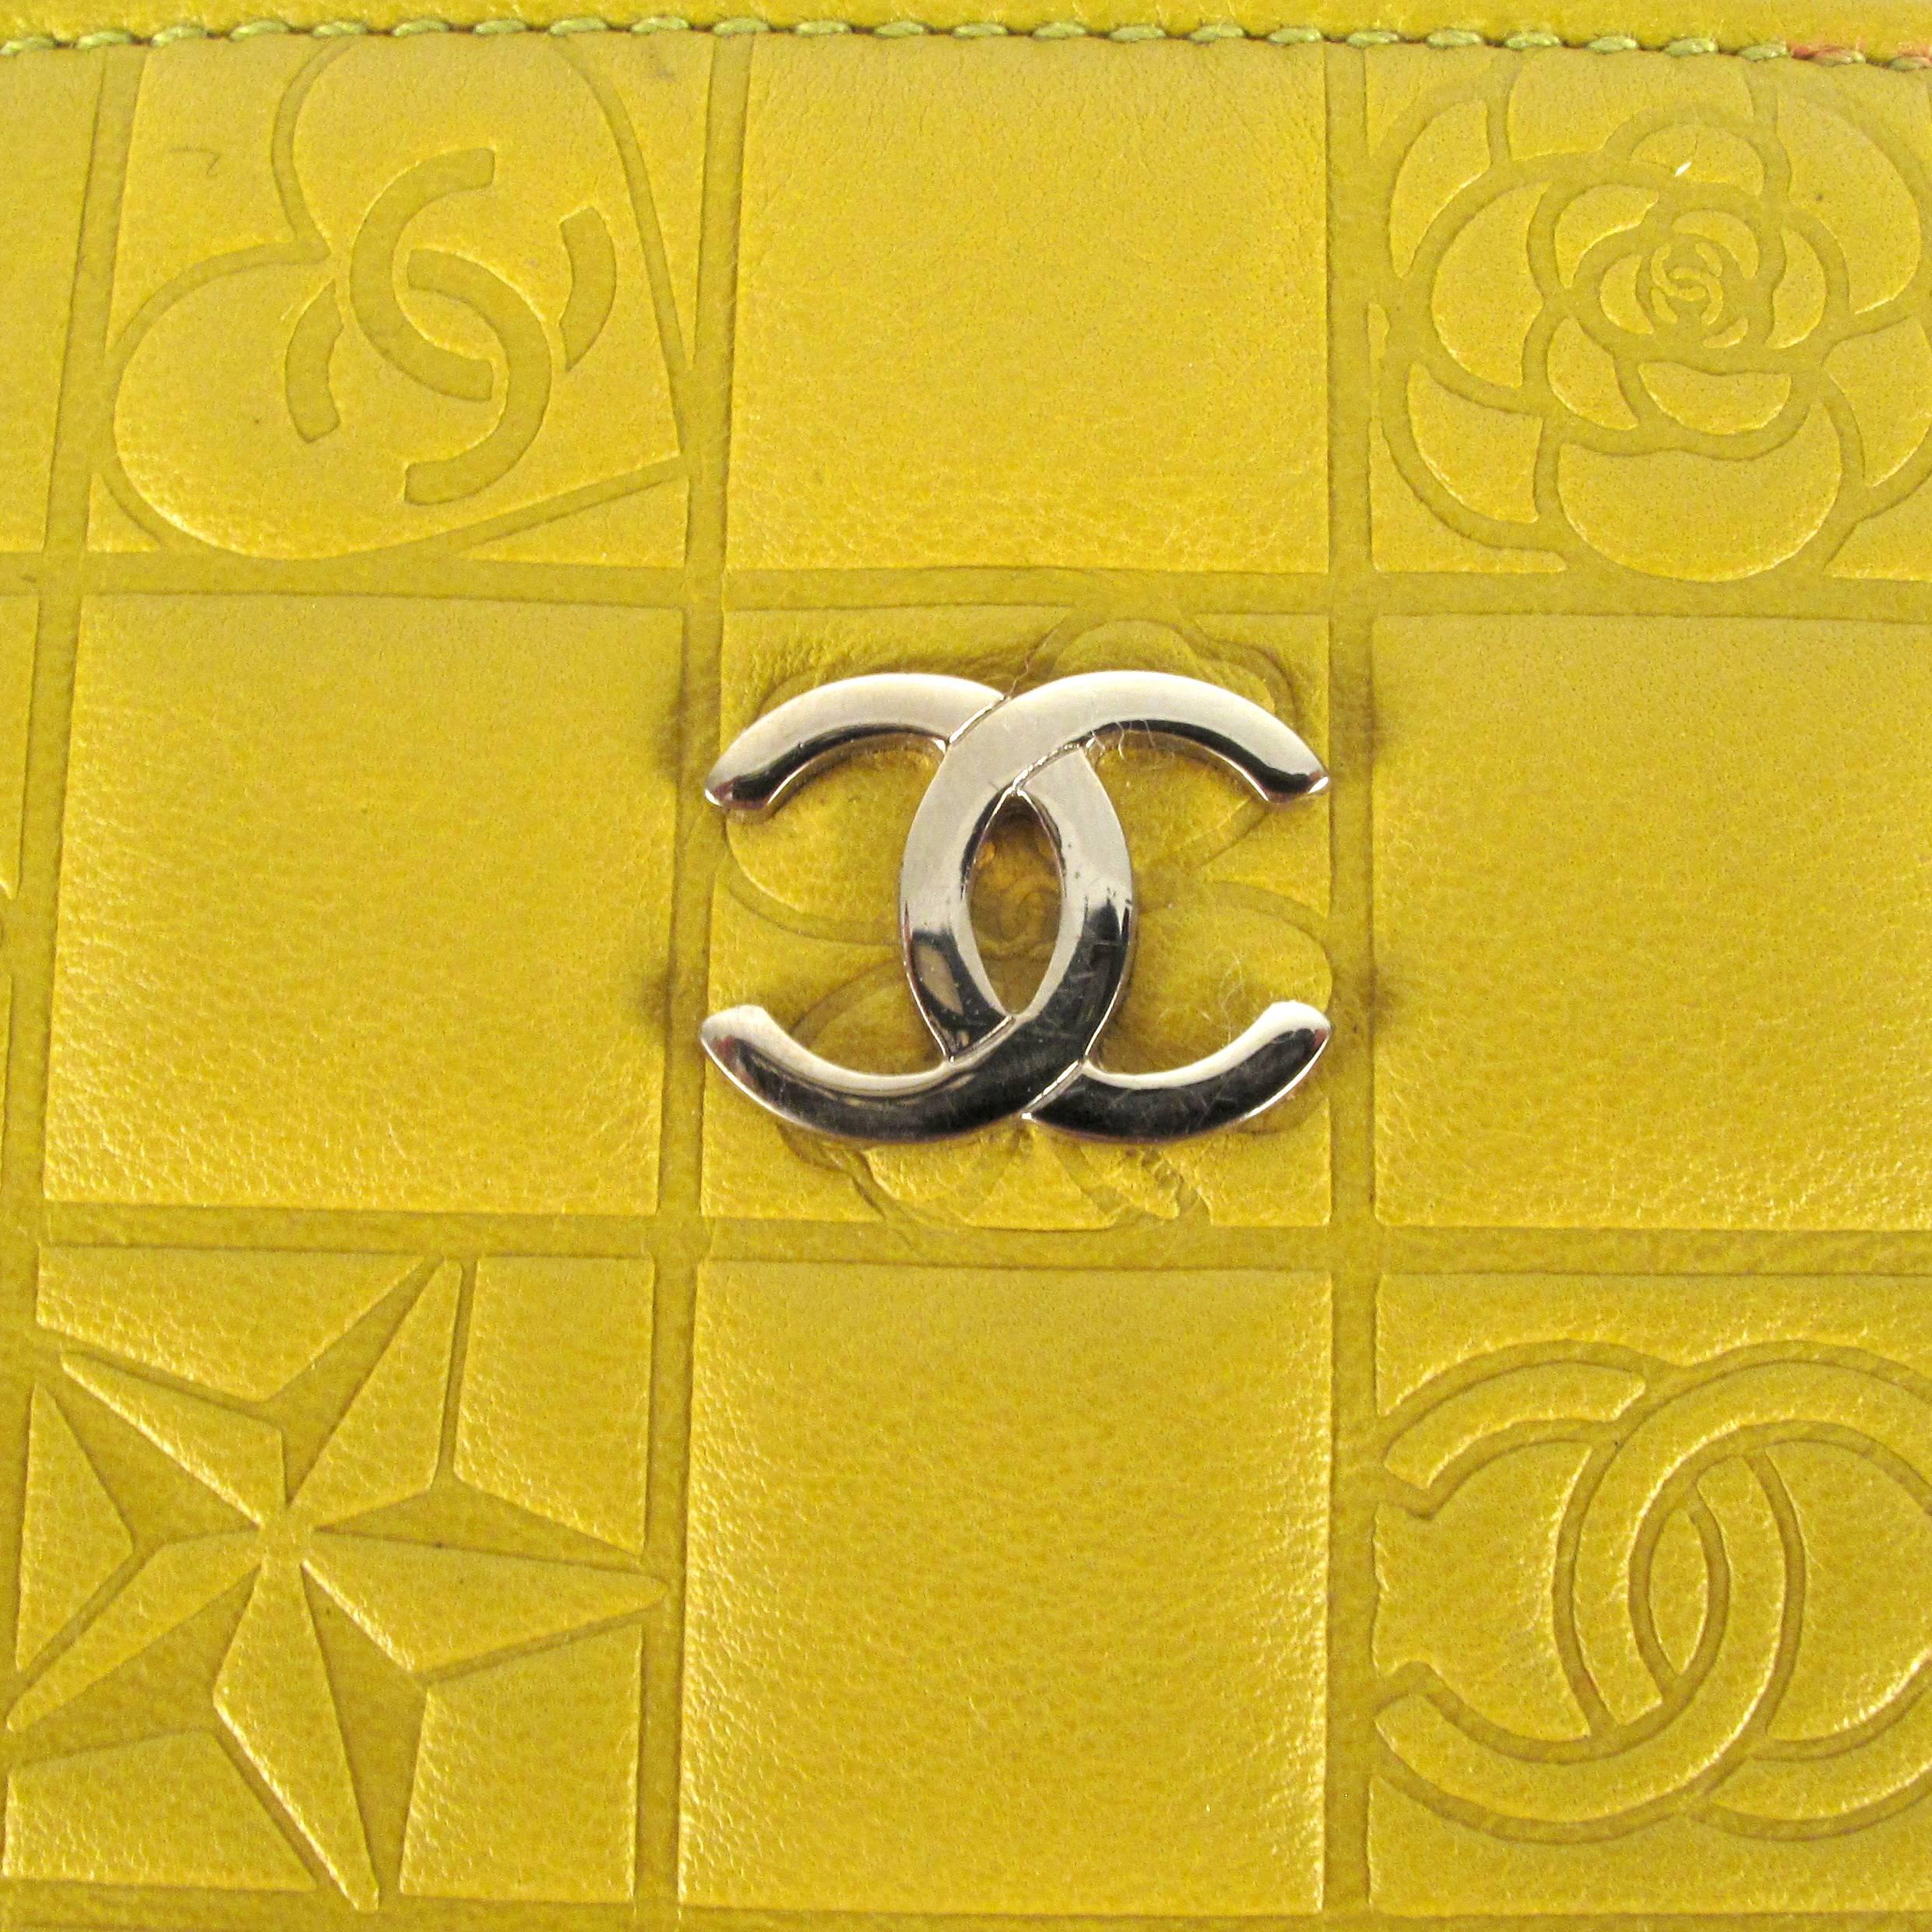 Chanel Lucky Charm Bag - Yellow Leather CC Symbols Silver Chain Clutch Handbag For Sale 2